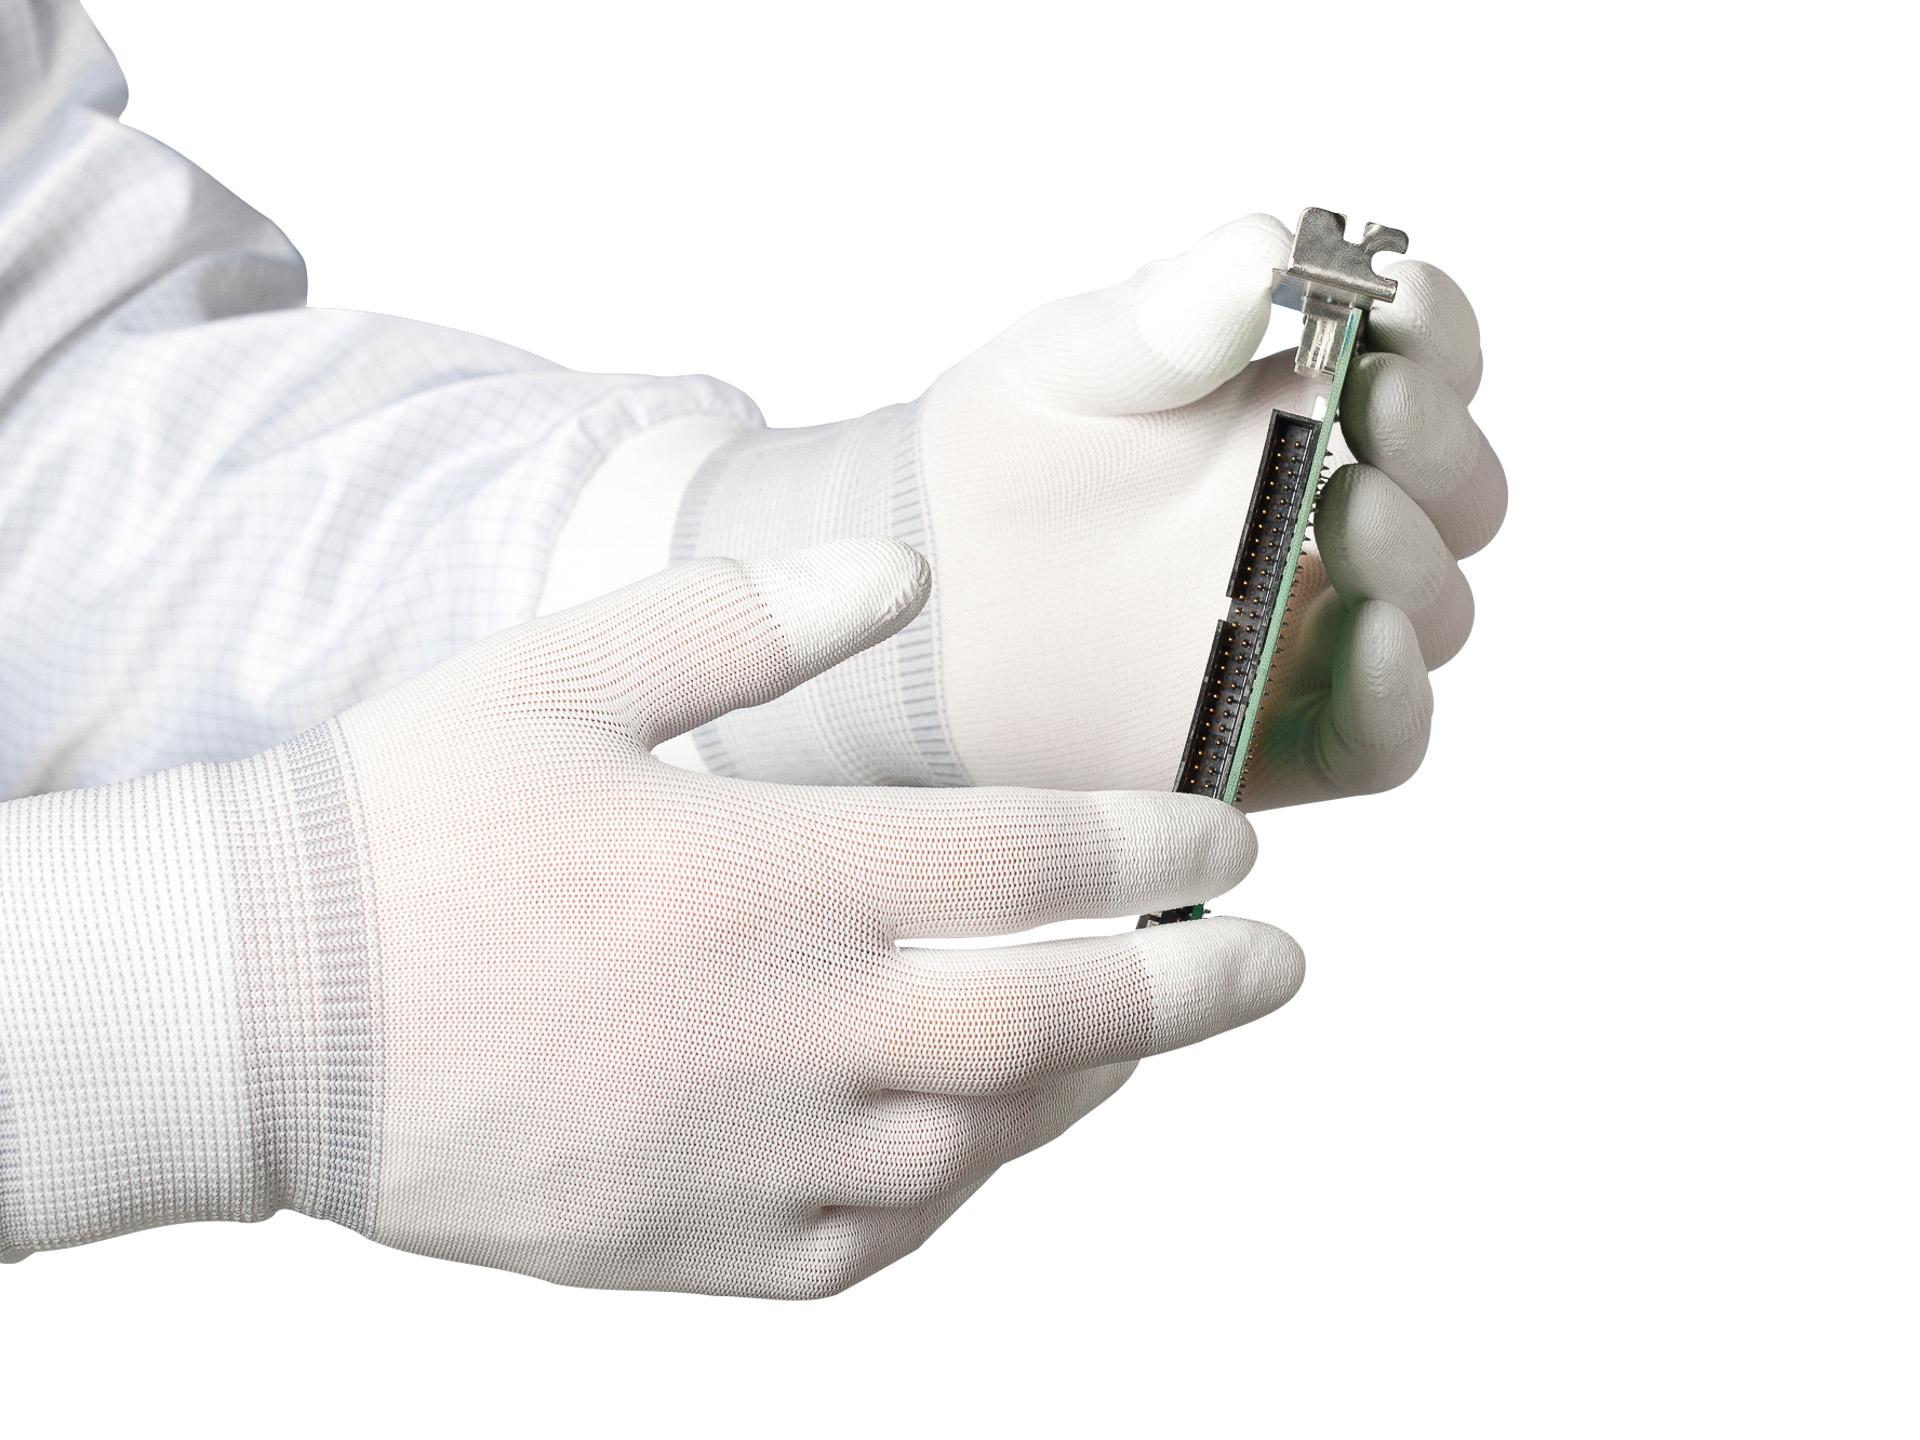 Cleanroom reusable glove, PU fingertips, antistatic (ESD)